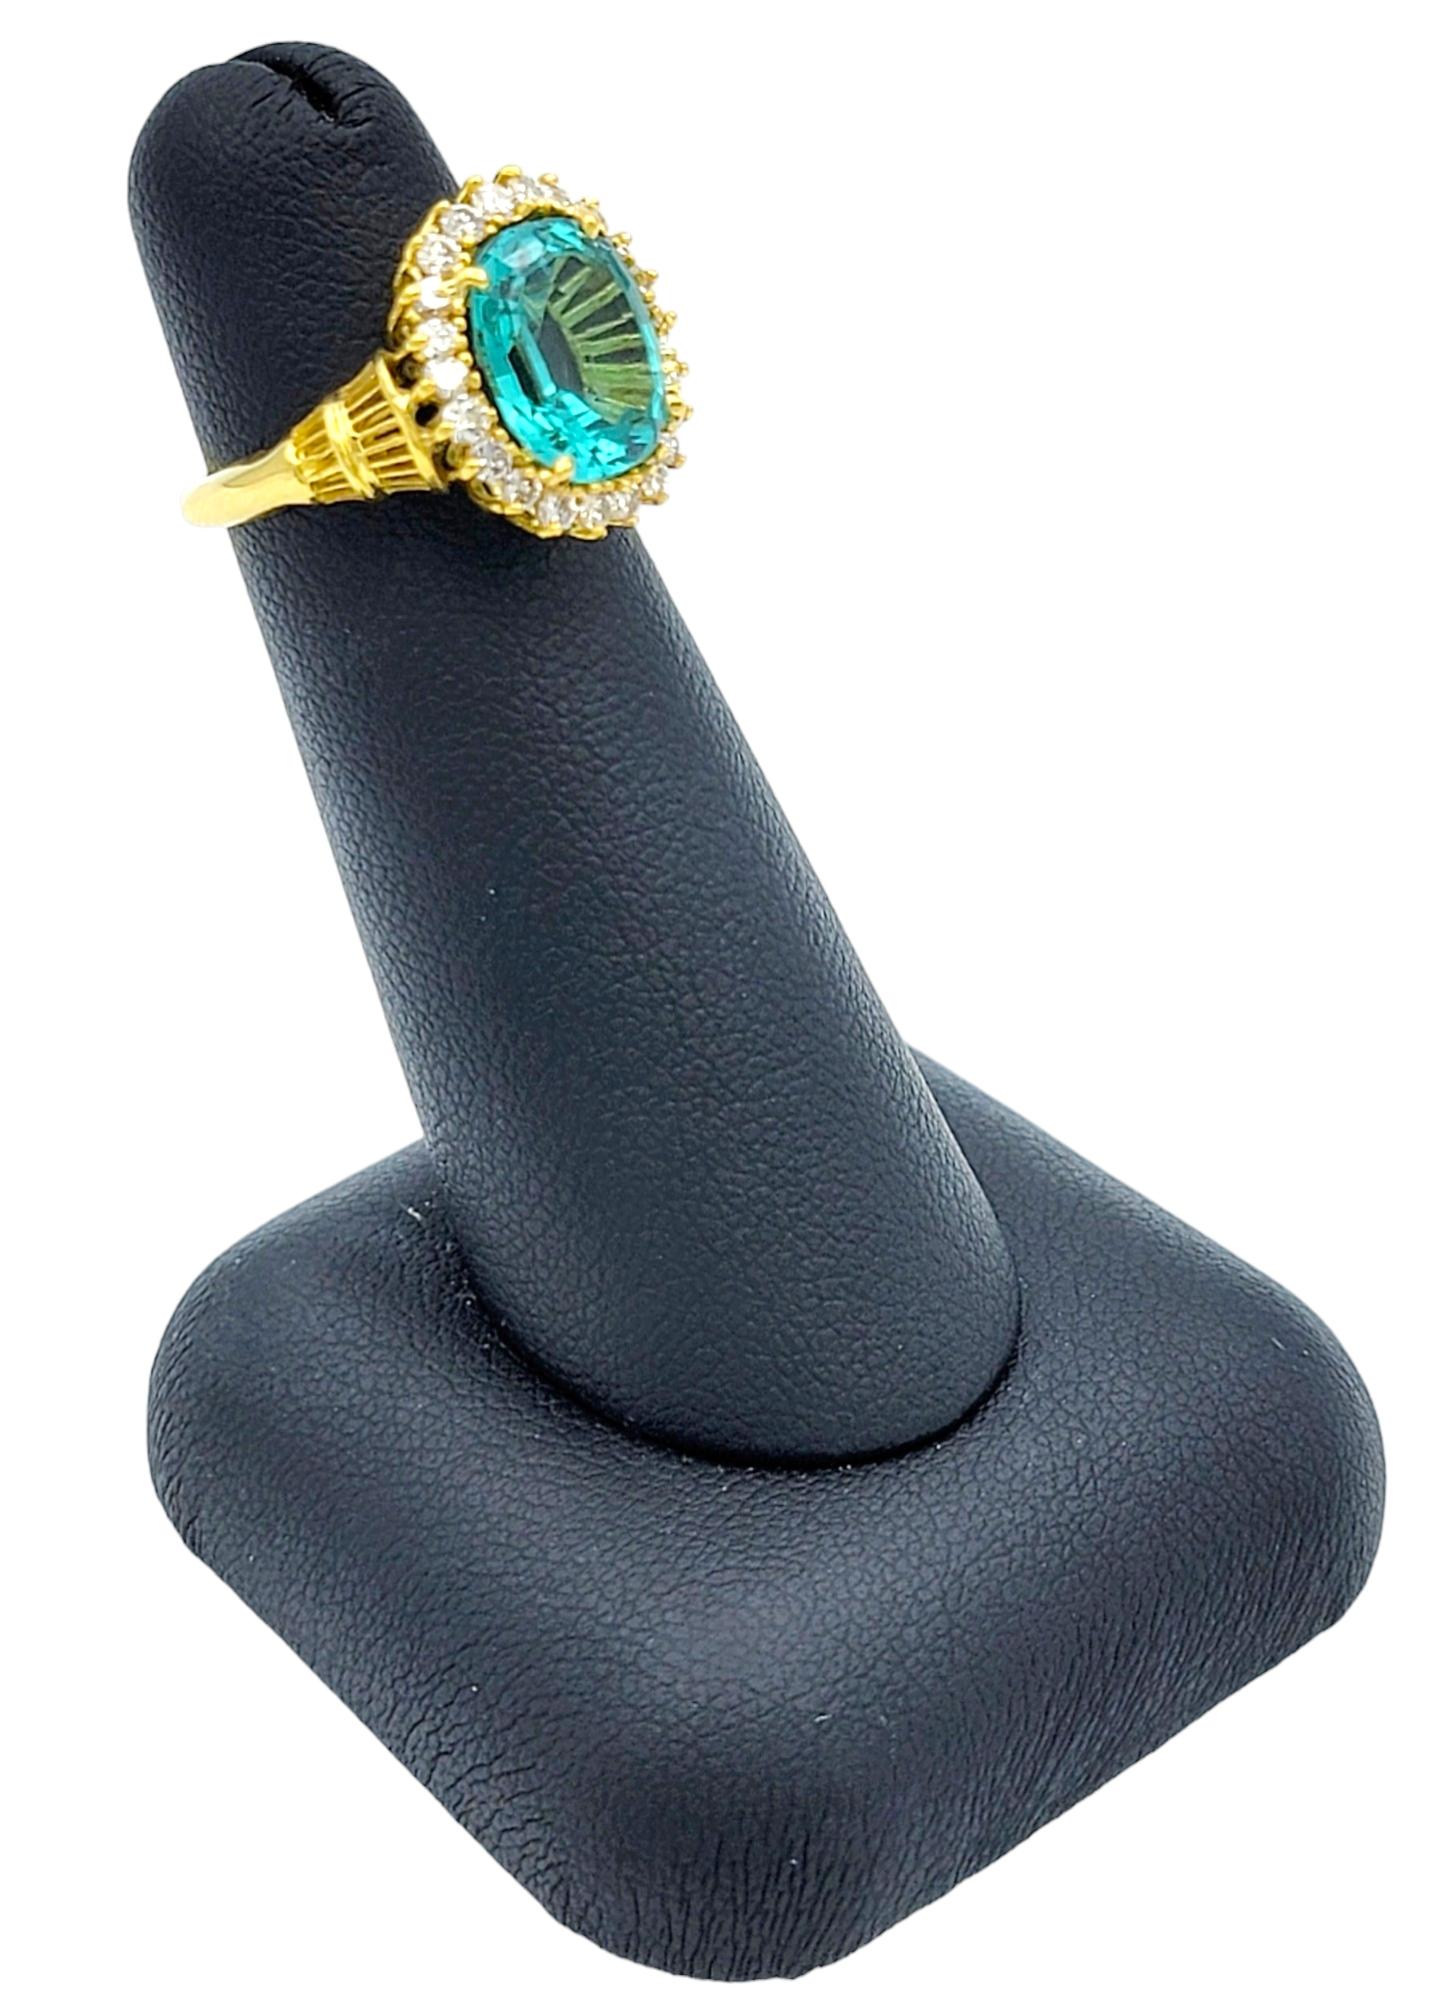 Rare 3.0 Carat Oval Cut Indicolite Tourmaline Ring with Diamond Halo in 18K Gold For Sale 5